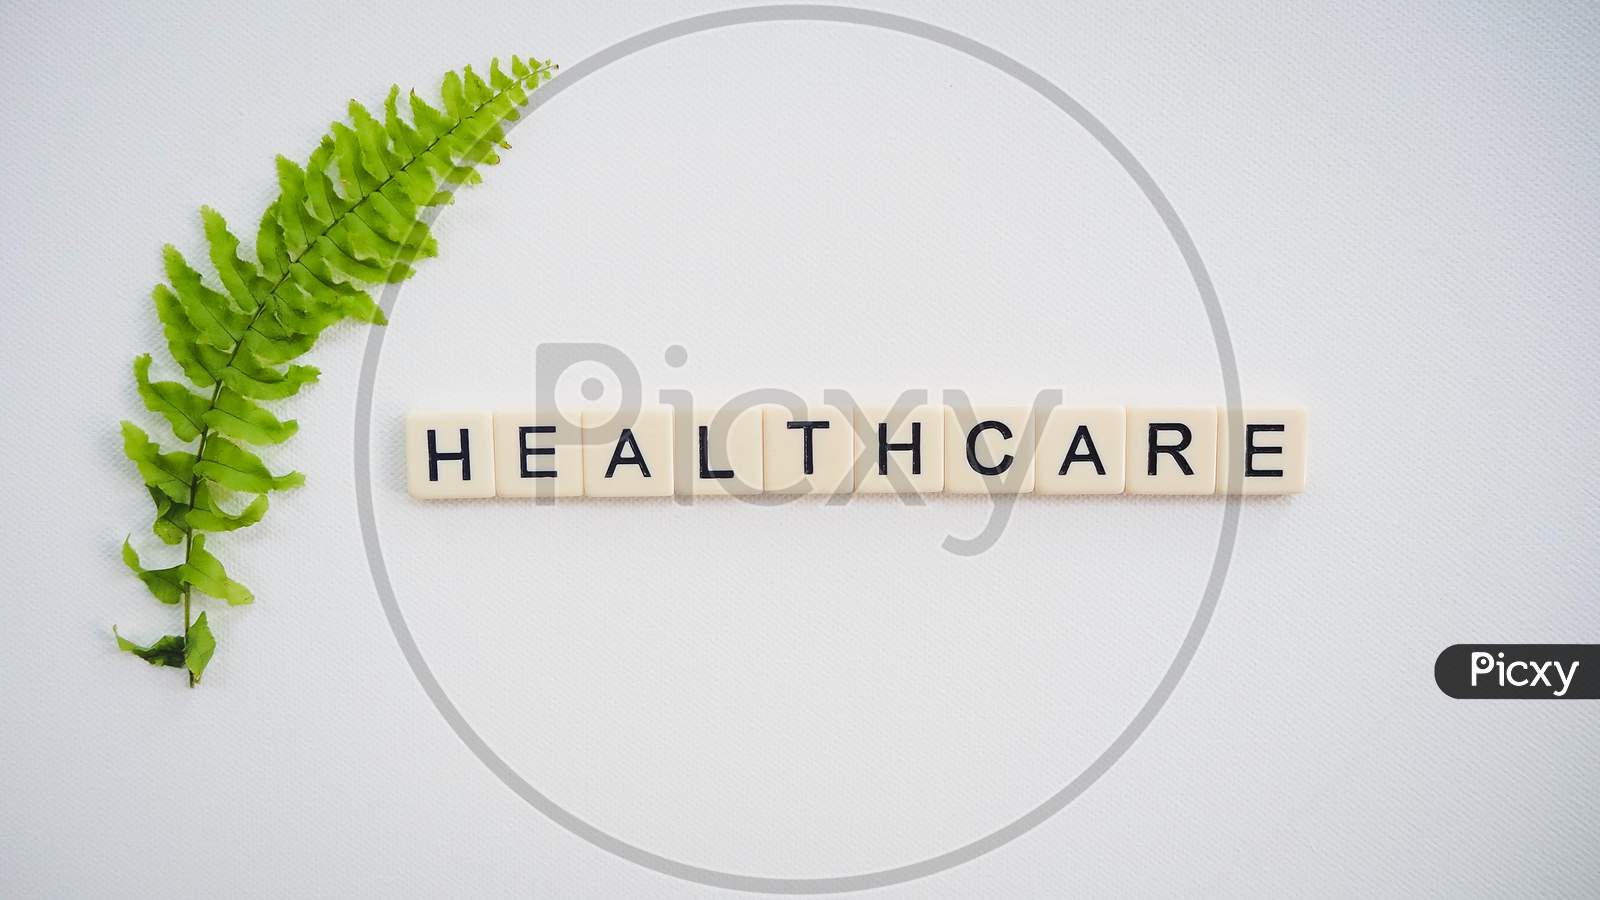 Healthcare text with green fern leaf over white background.